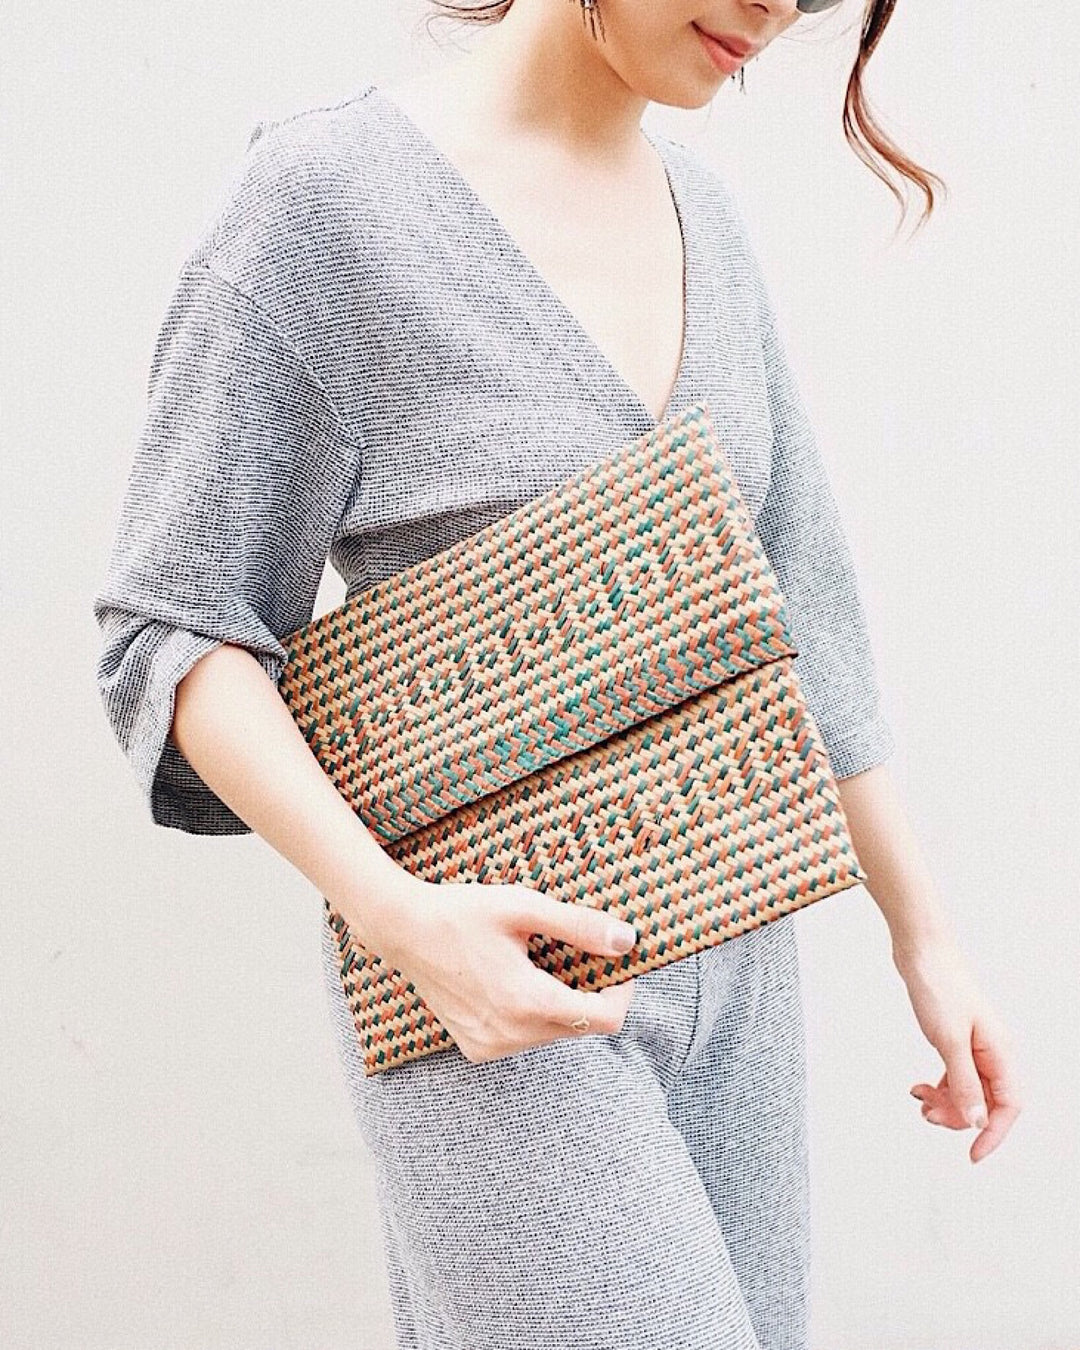 Coral seagrass woven clutch - olive & iris